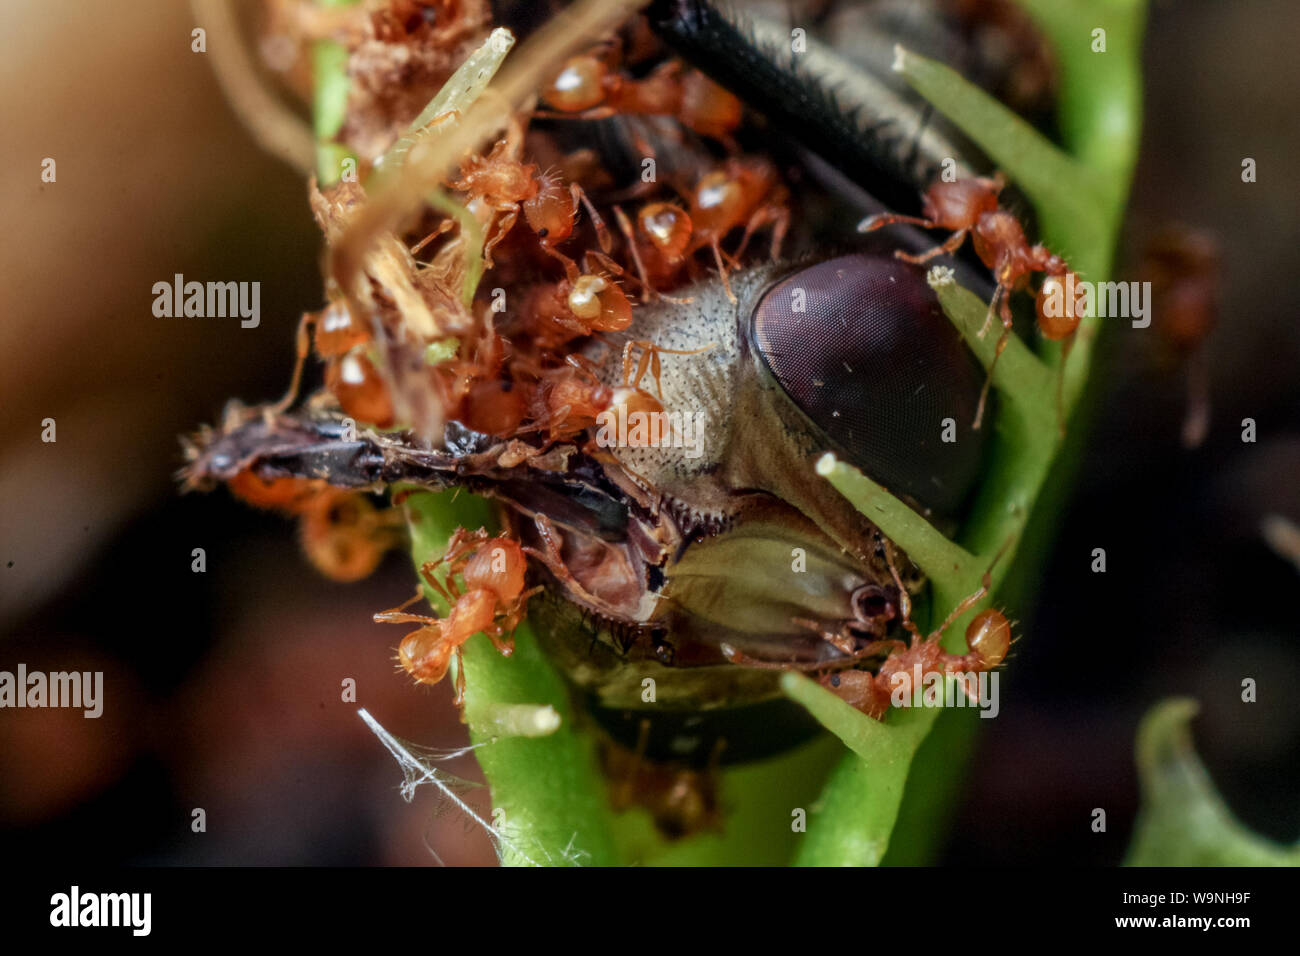 Insect trapped on a venus flytrap (Dionaea muscipula) Stock Photo